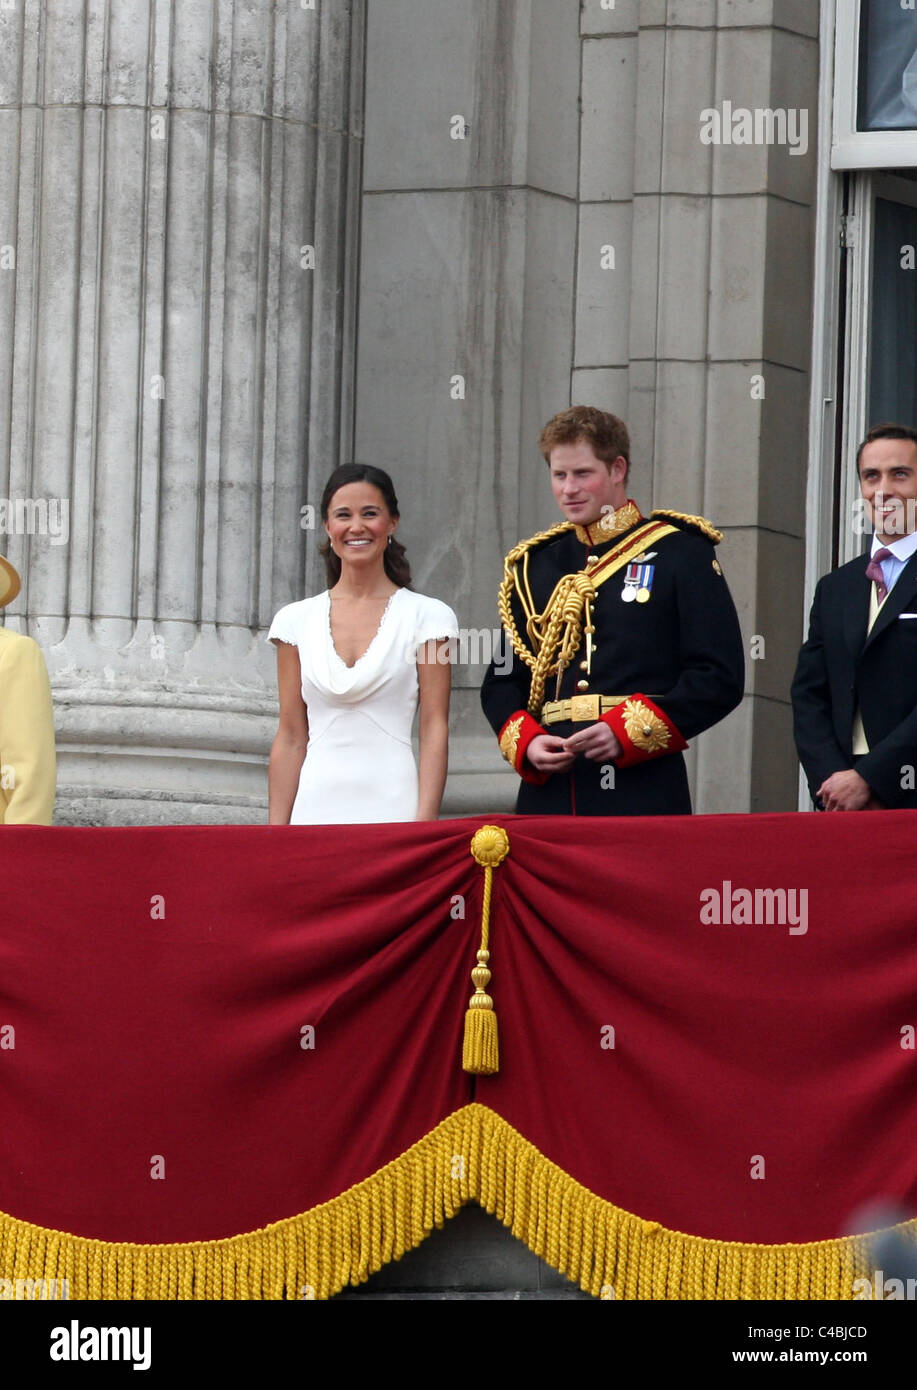 PIPPA MIDDLETON AND PRINCE HARRY AT THE ROYAL WEDDING OF PRINCE WILLIAM AND KATE MIDDLETON Stock Photo